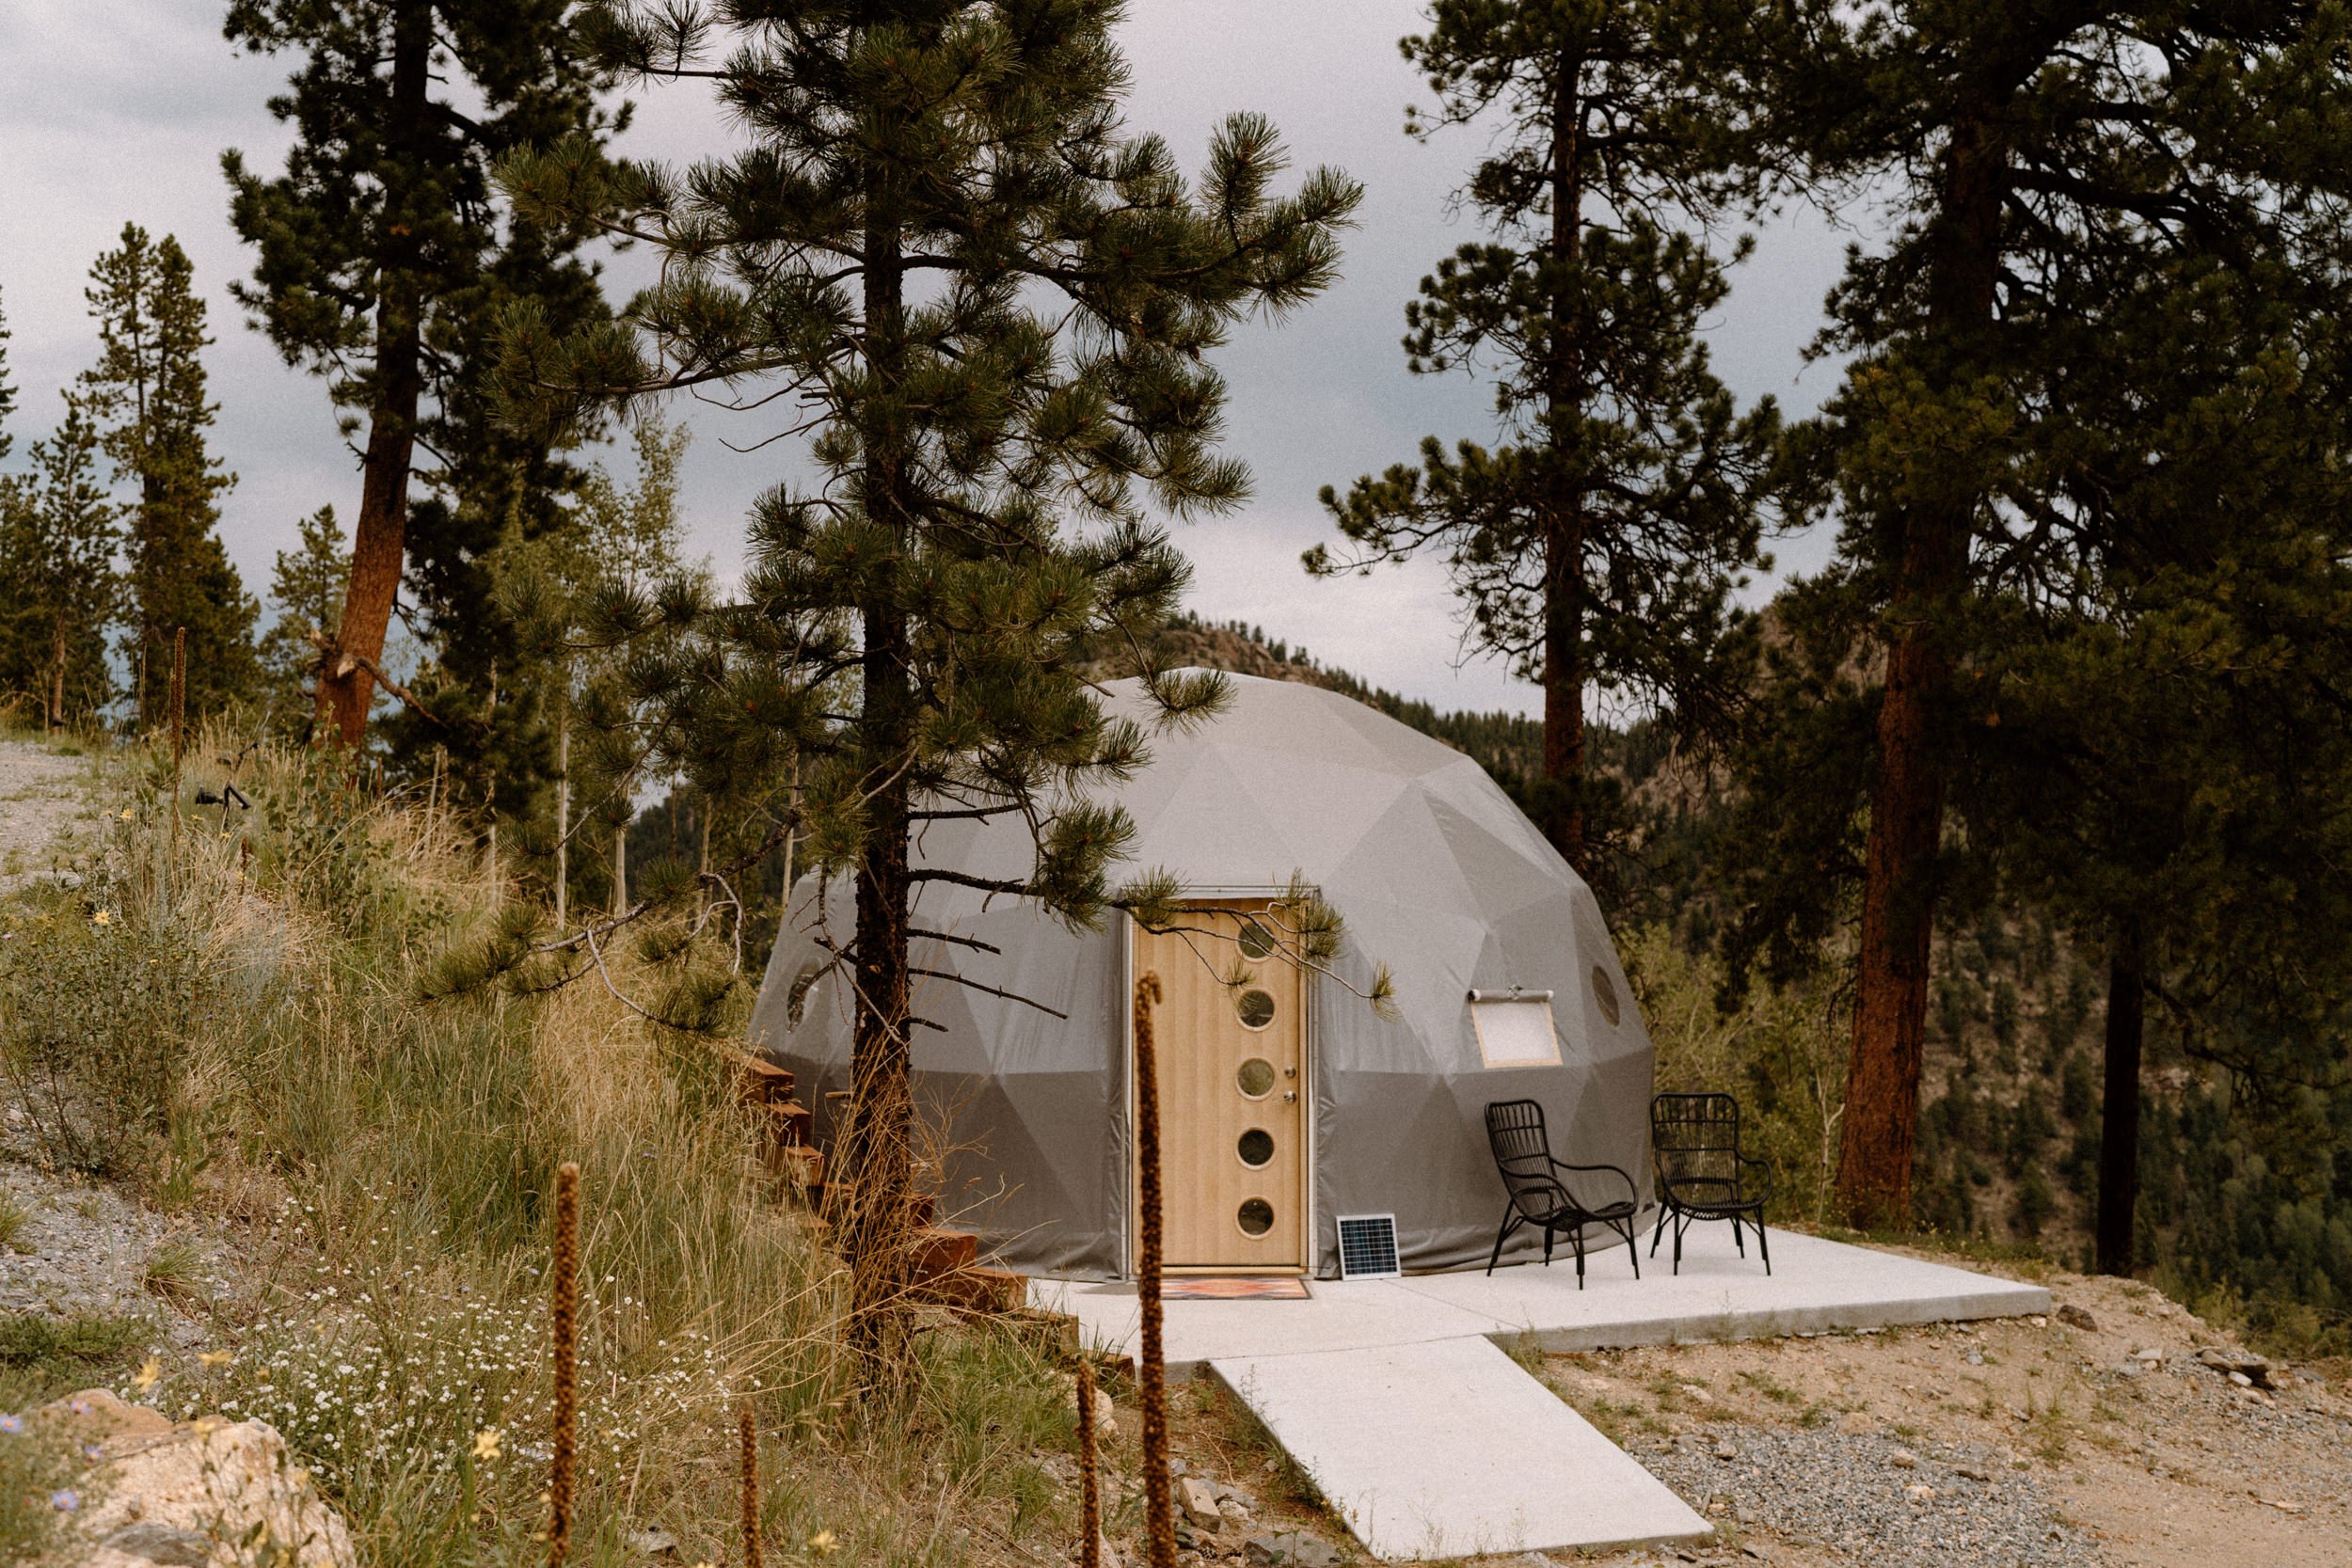 A modern gray glamping dome located at North Star Gatherings in Idaho Springs, CO